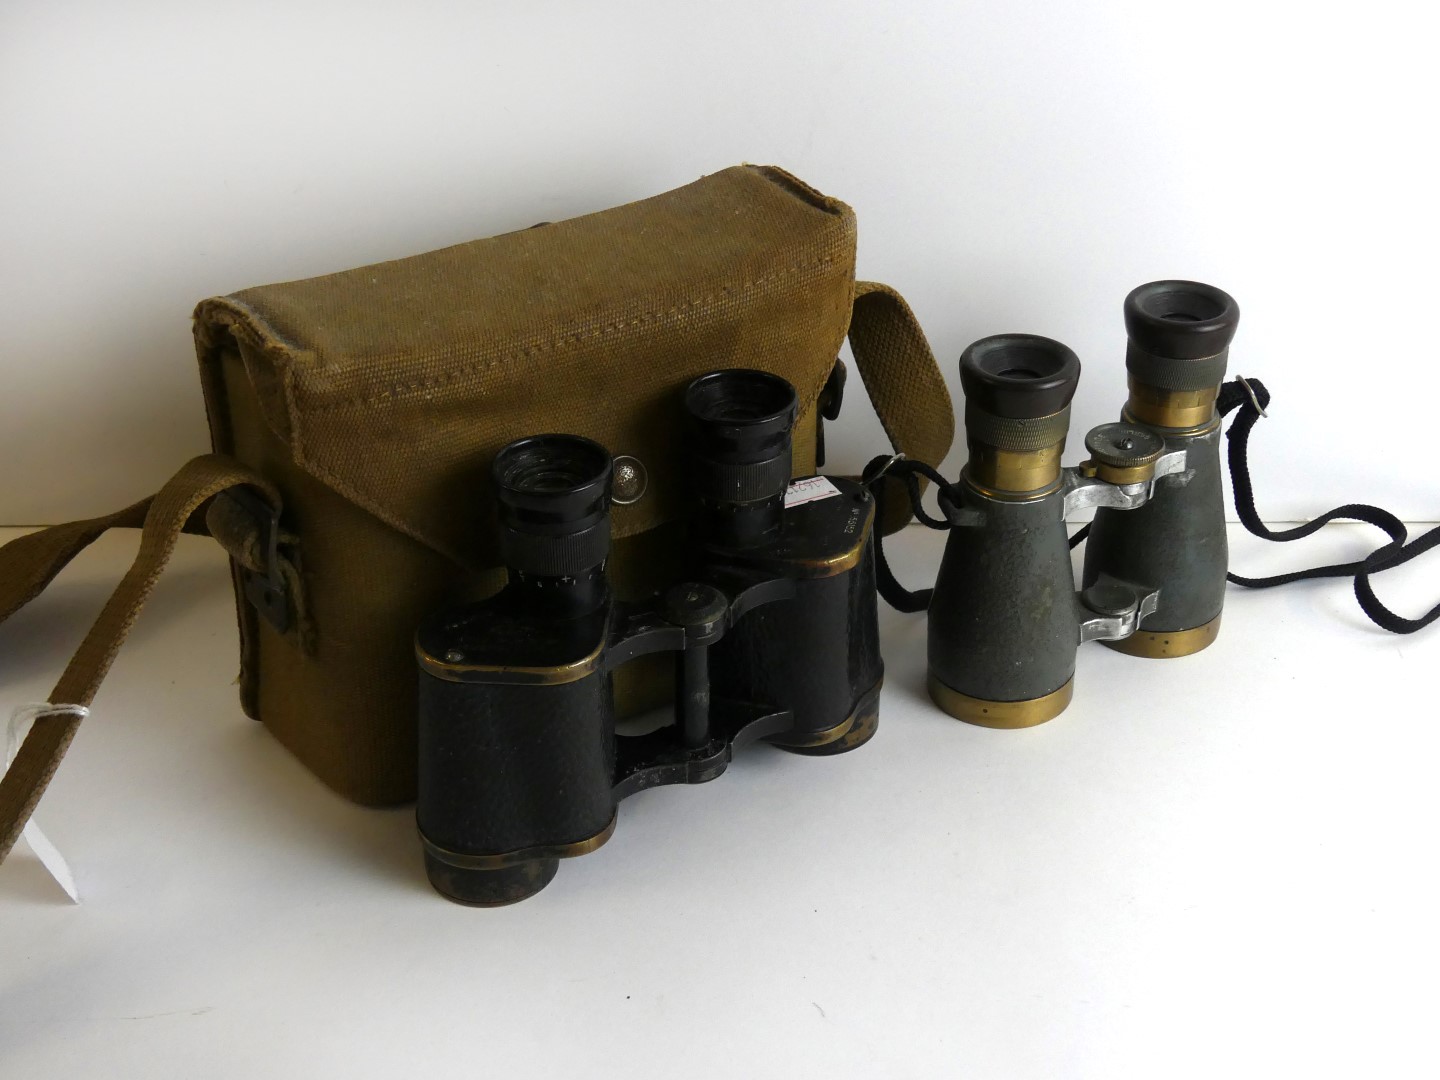 A cased pair of WWII military issue binoculars Kershaw binoculars in a canvas case by Finnigans Ltd